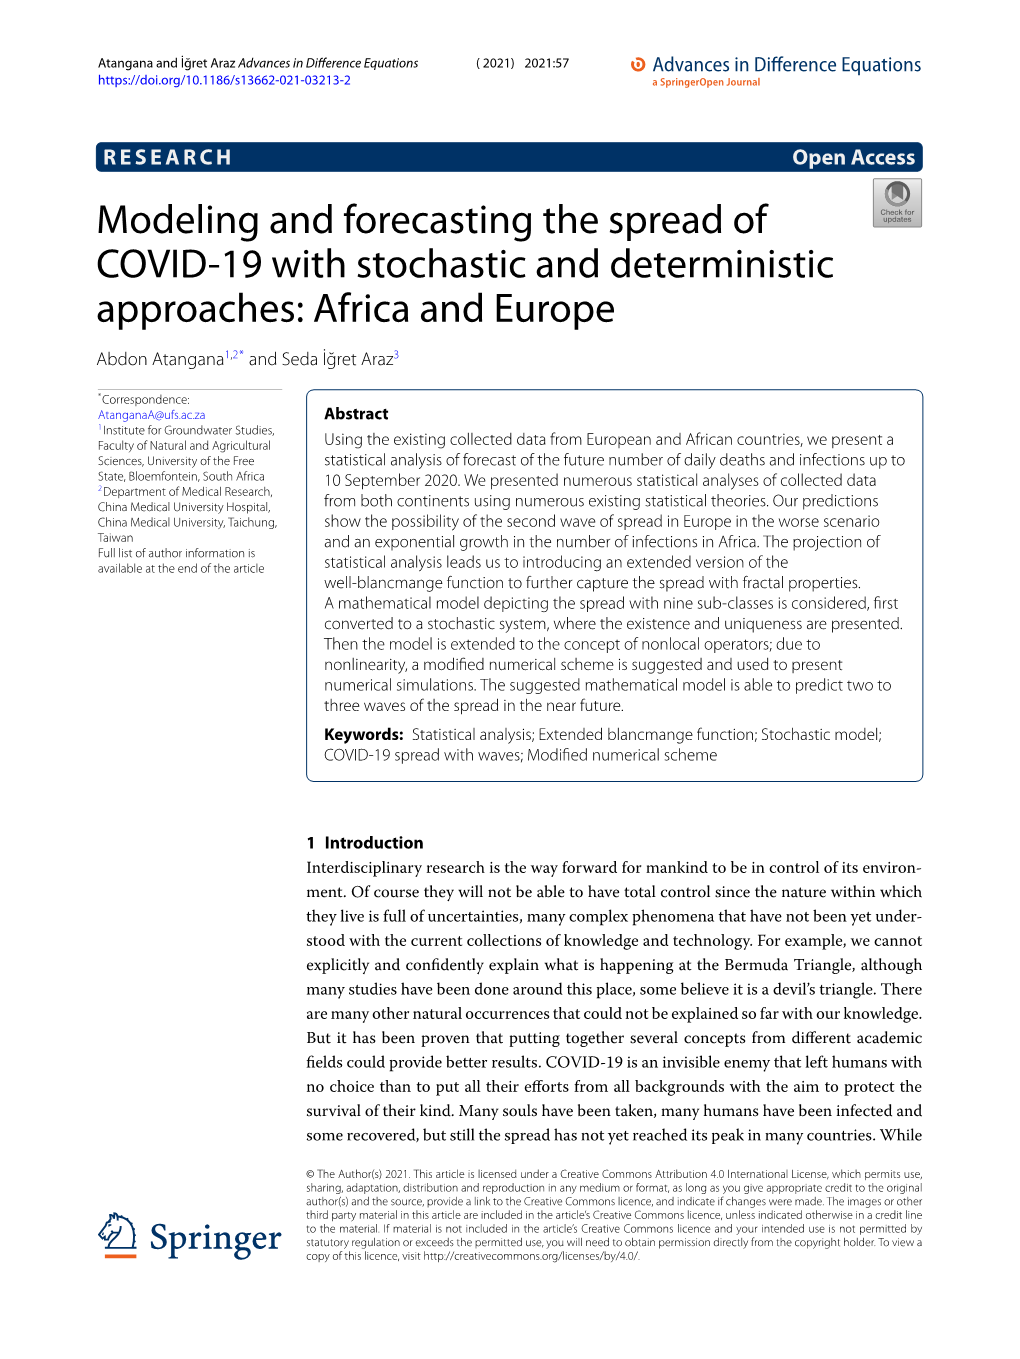 Modeling and Forecasting the Spread of COVID-19 with Stochastic and Deterministic Approaches: Africa and Europe